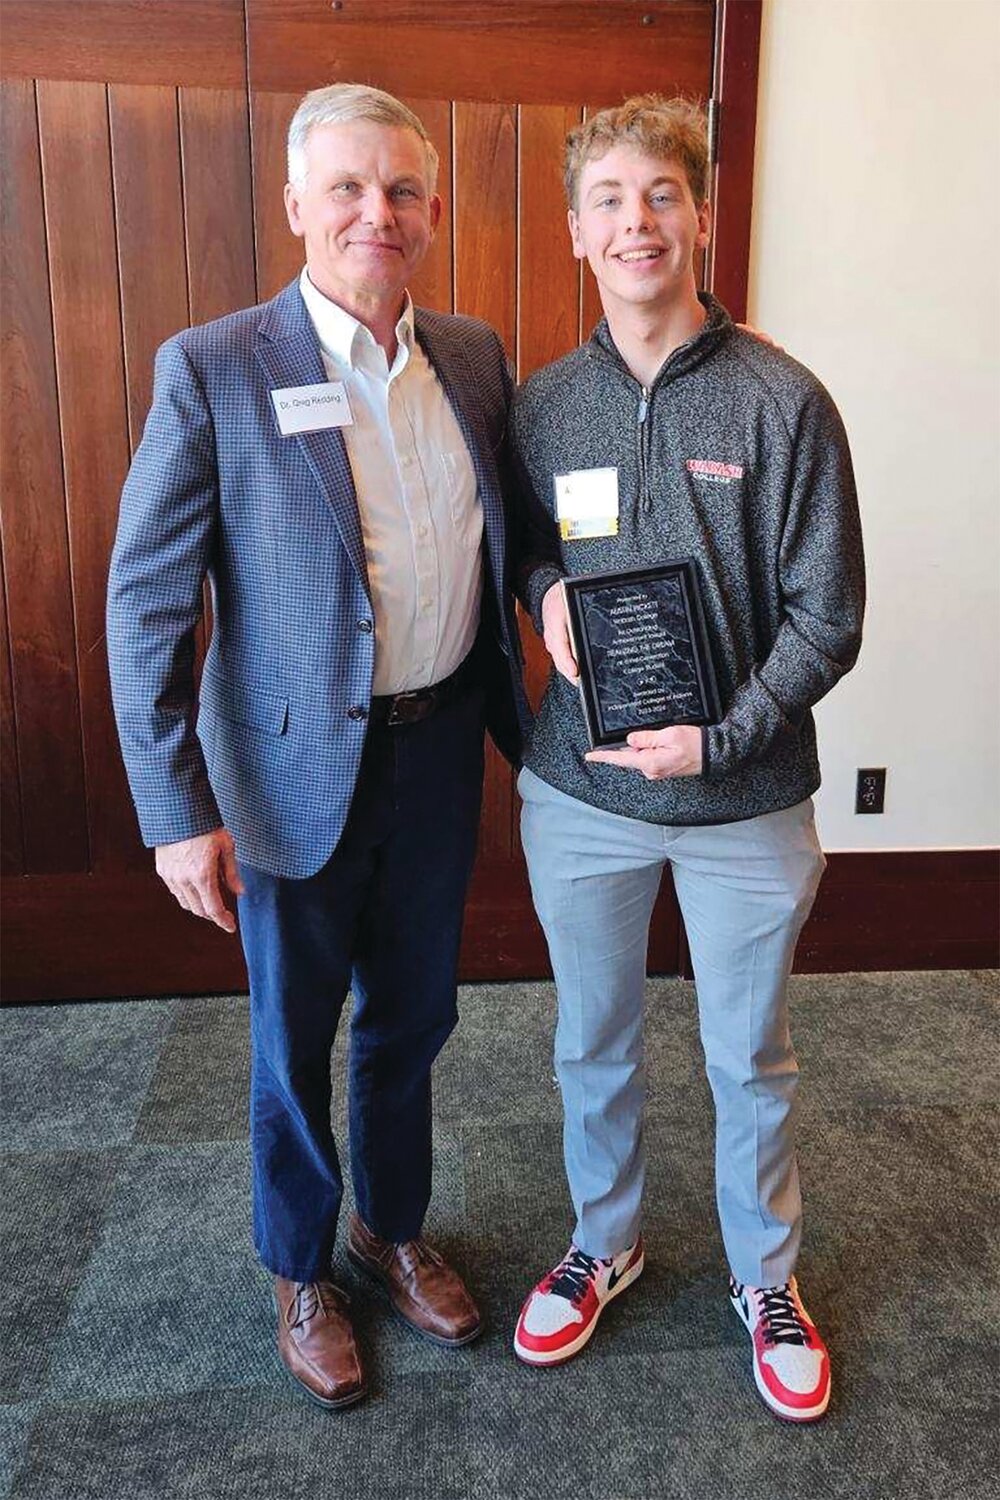 Wabash College student Austin PIckett, right, received the “Realizing the Dream” scholarship, one of 29 first-generation college students statewide to be honored. He is pictured with Dr. Greg Redding, Dean of Students and Associate Professor of German.